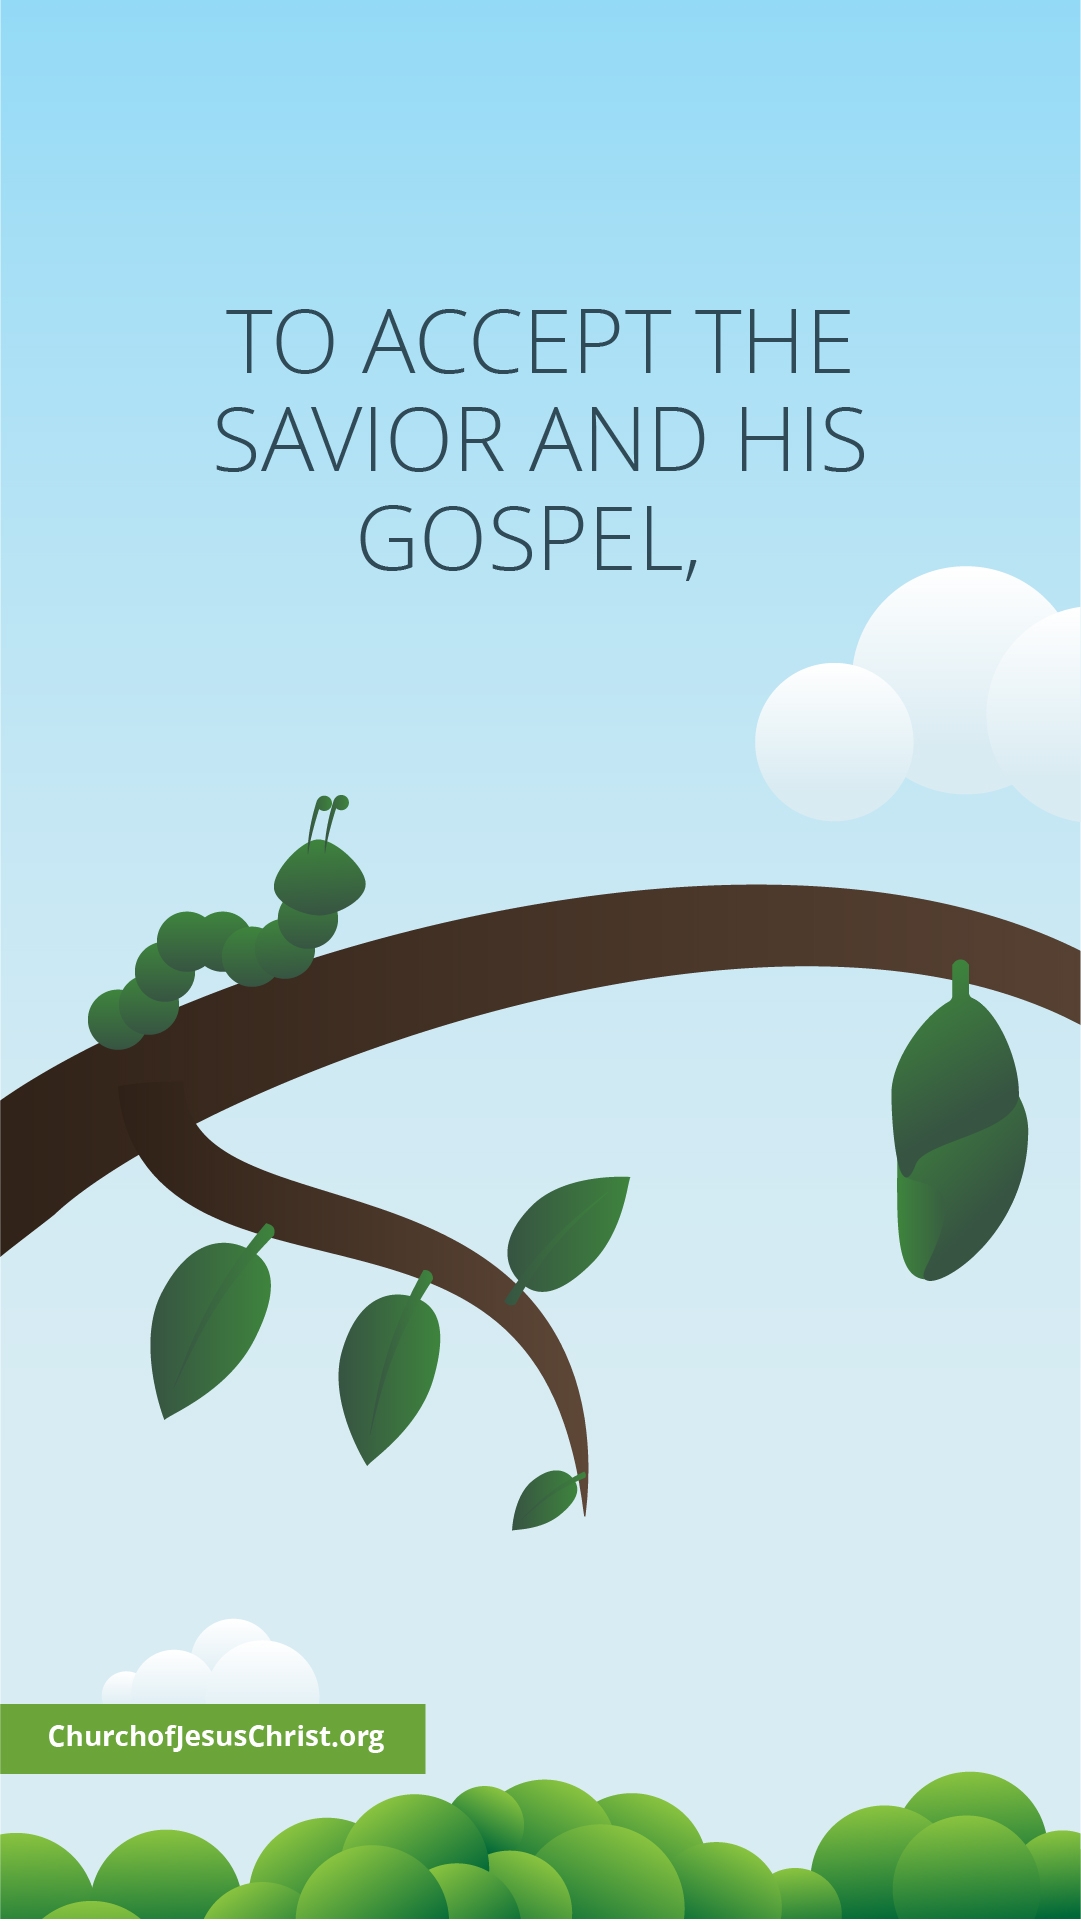 First of a two-part meme of a caterpillar on a branch, paired with a thought: To accept the Savior . . .